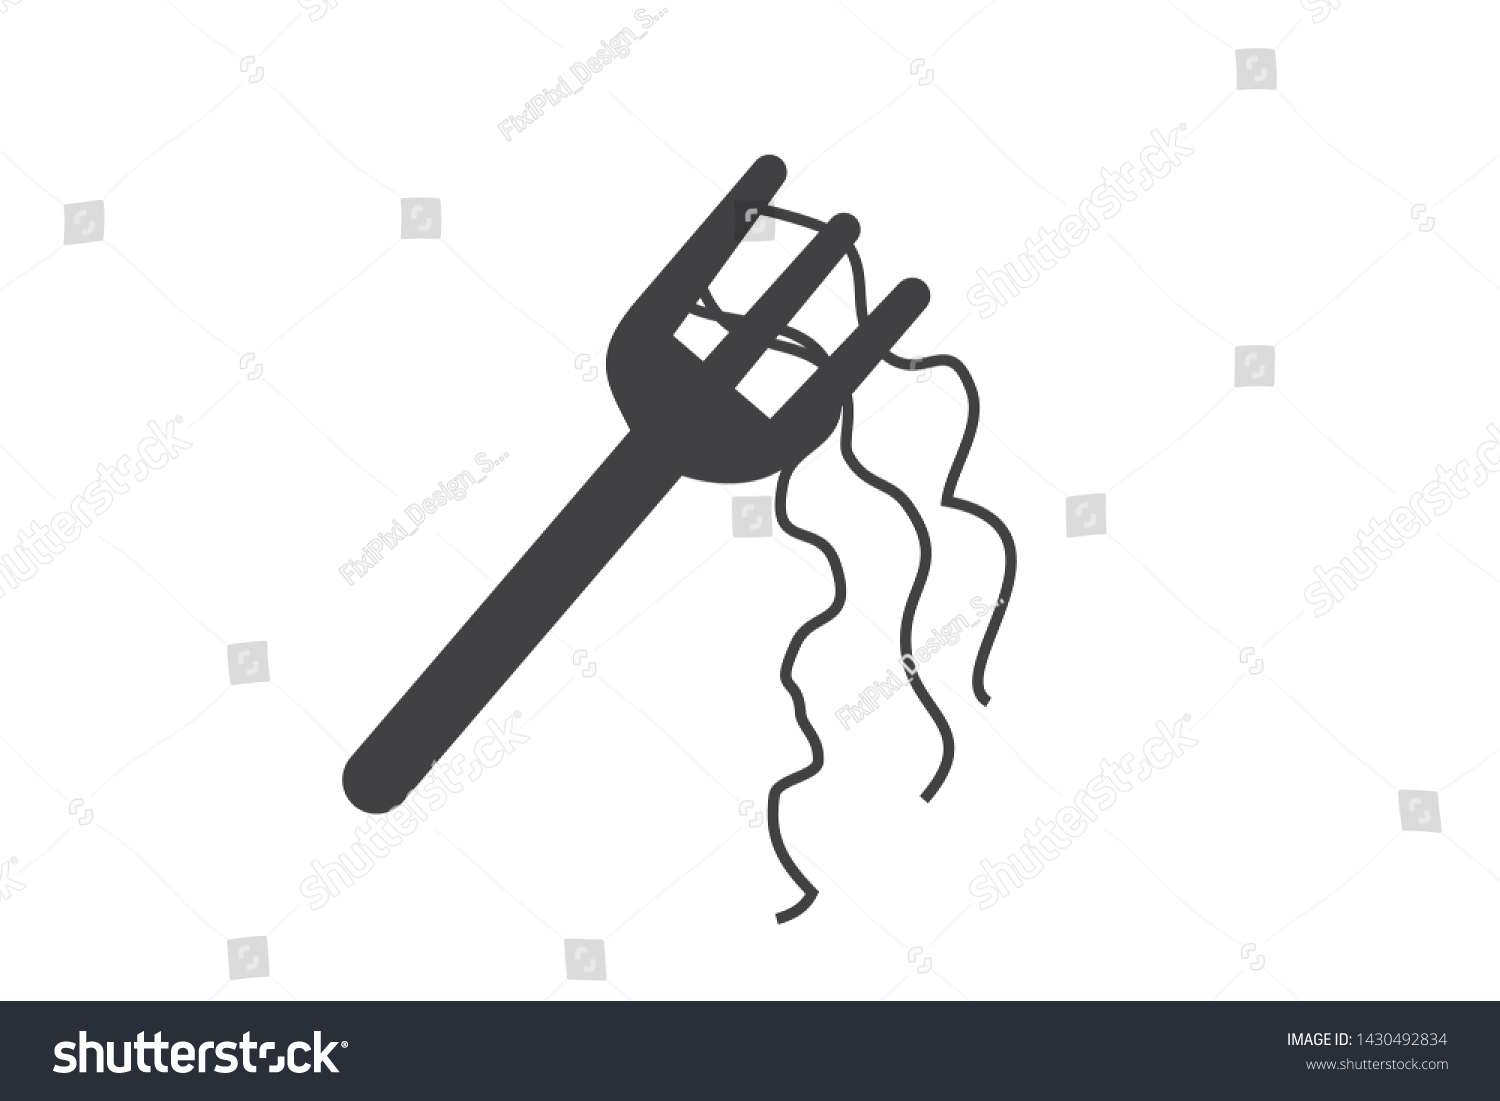 SVG of Spoon with noodles or chow mein icon svg